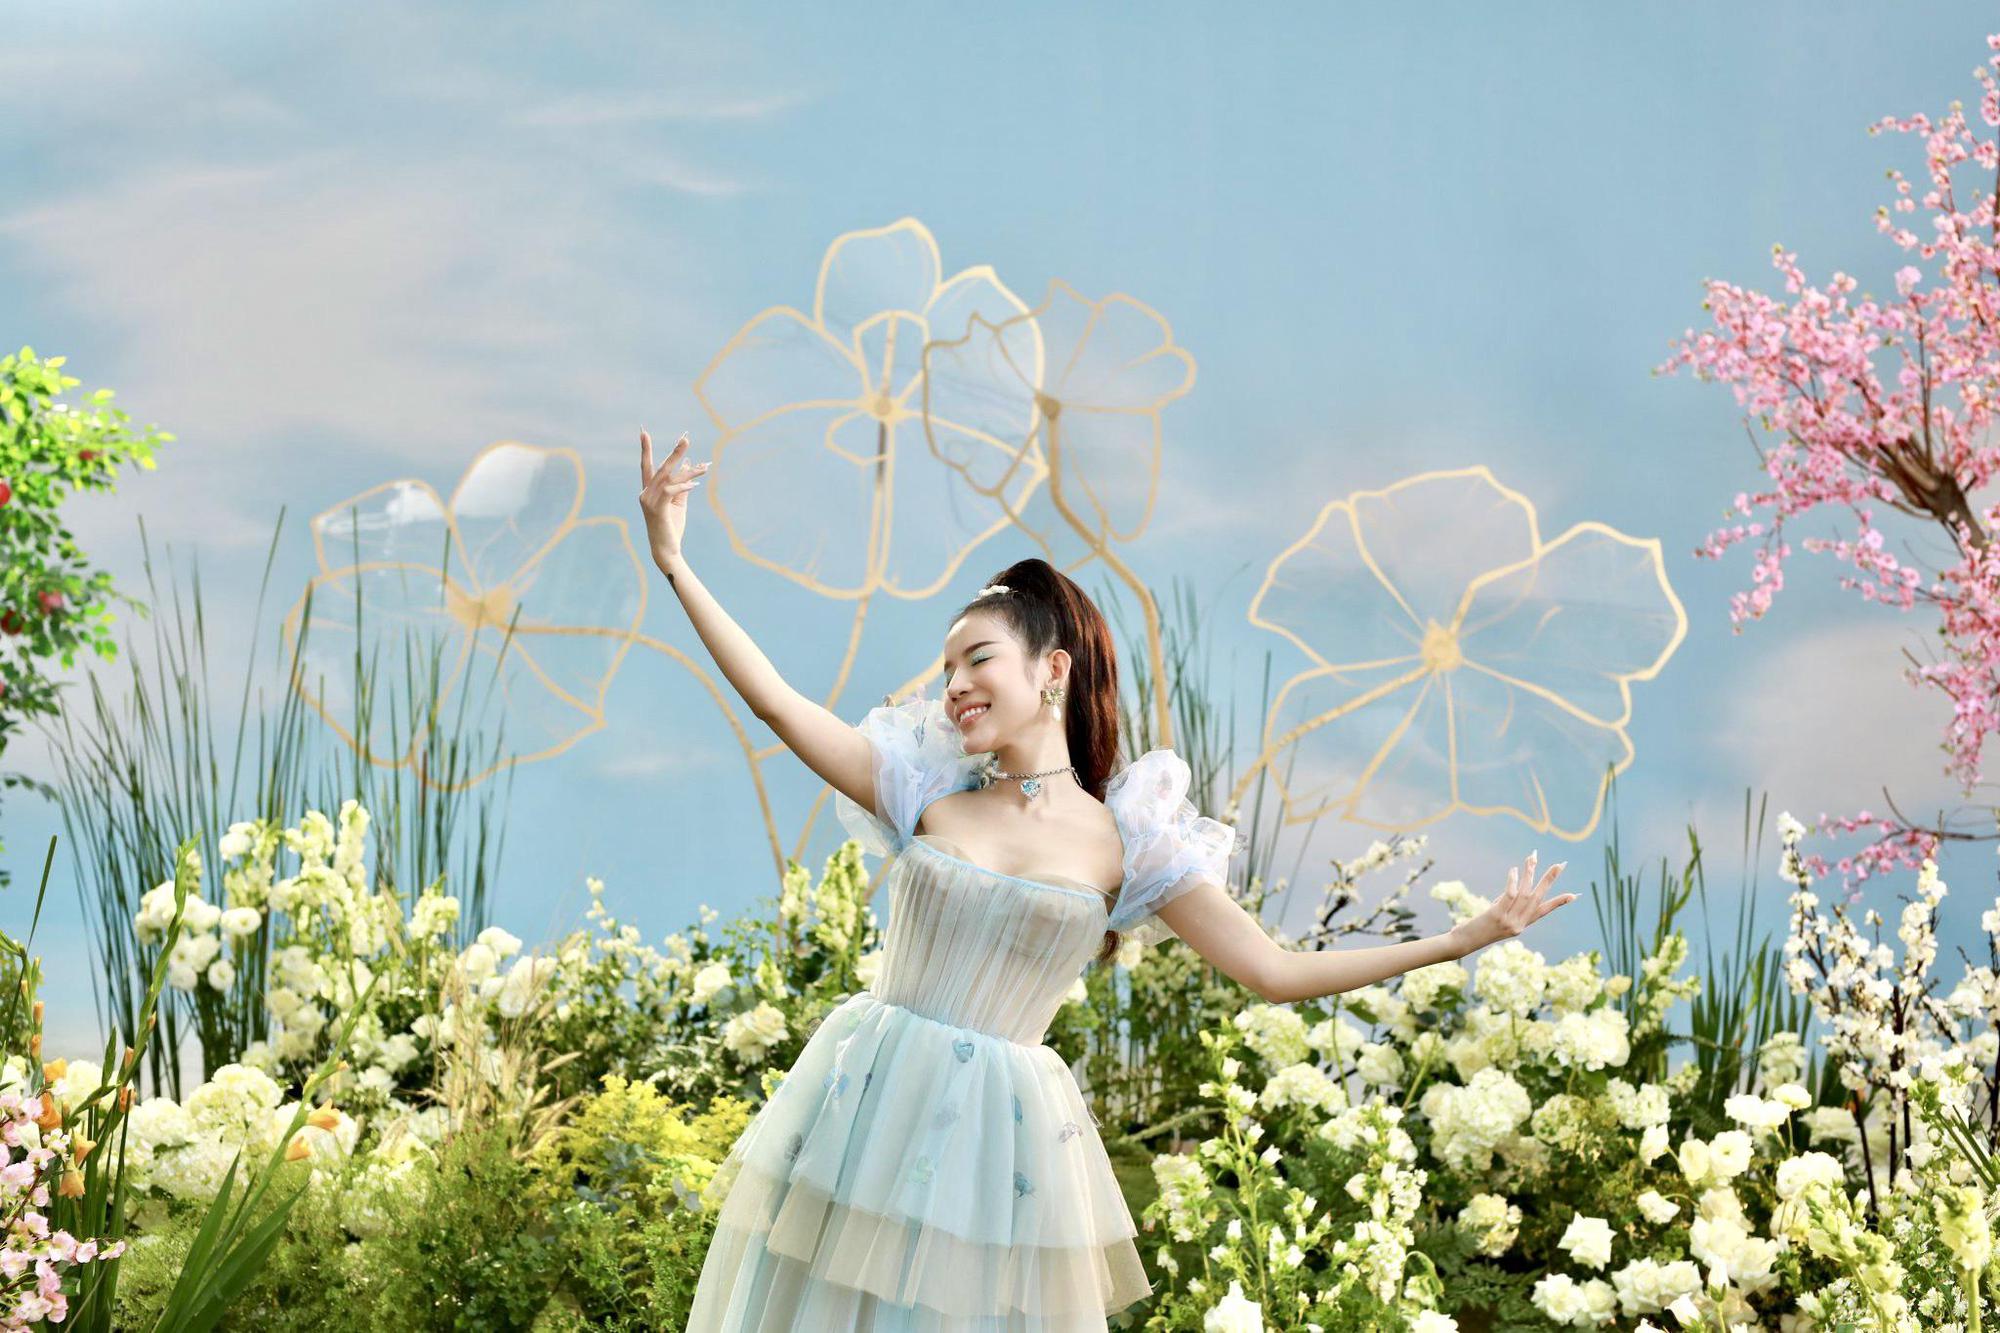 LyLy is too beautiful in the new MV, willing to play and transform into 3 princesses that make fans 